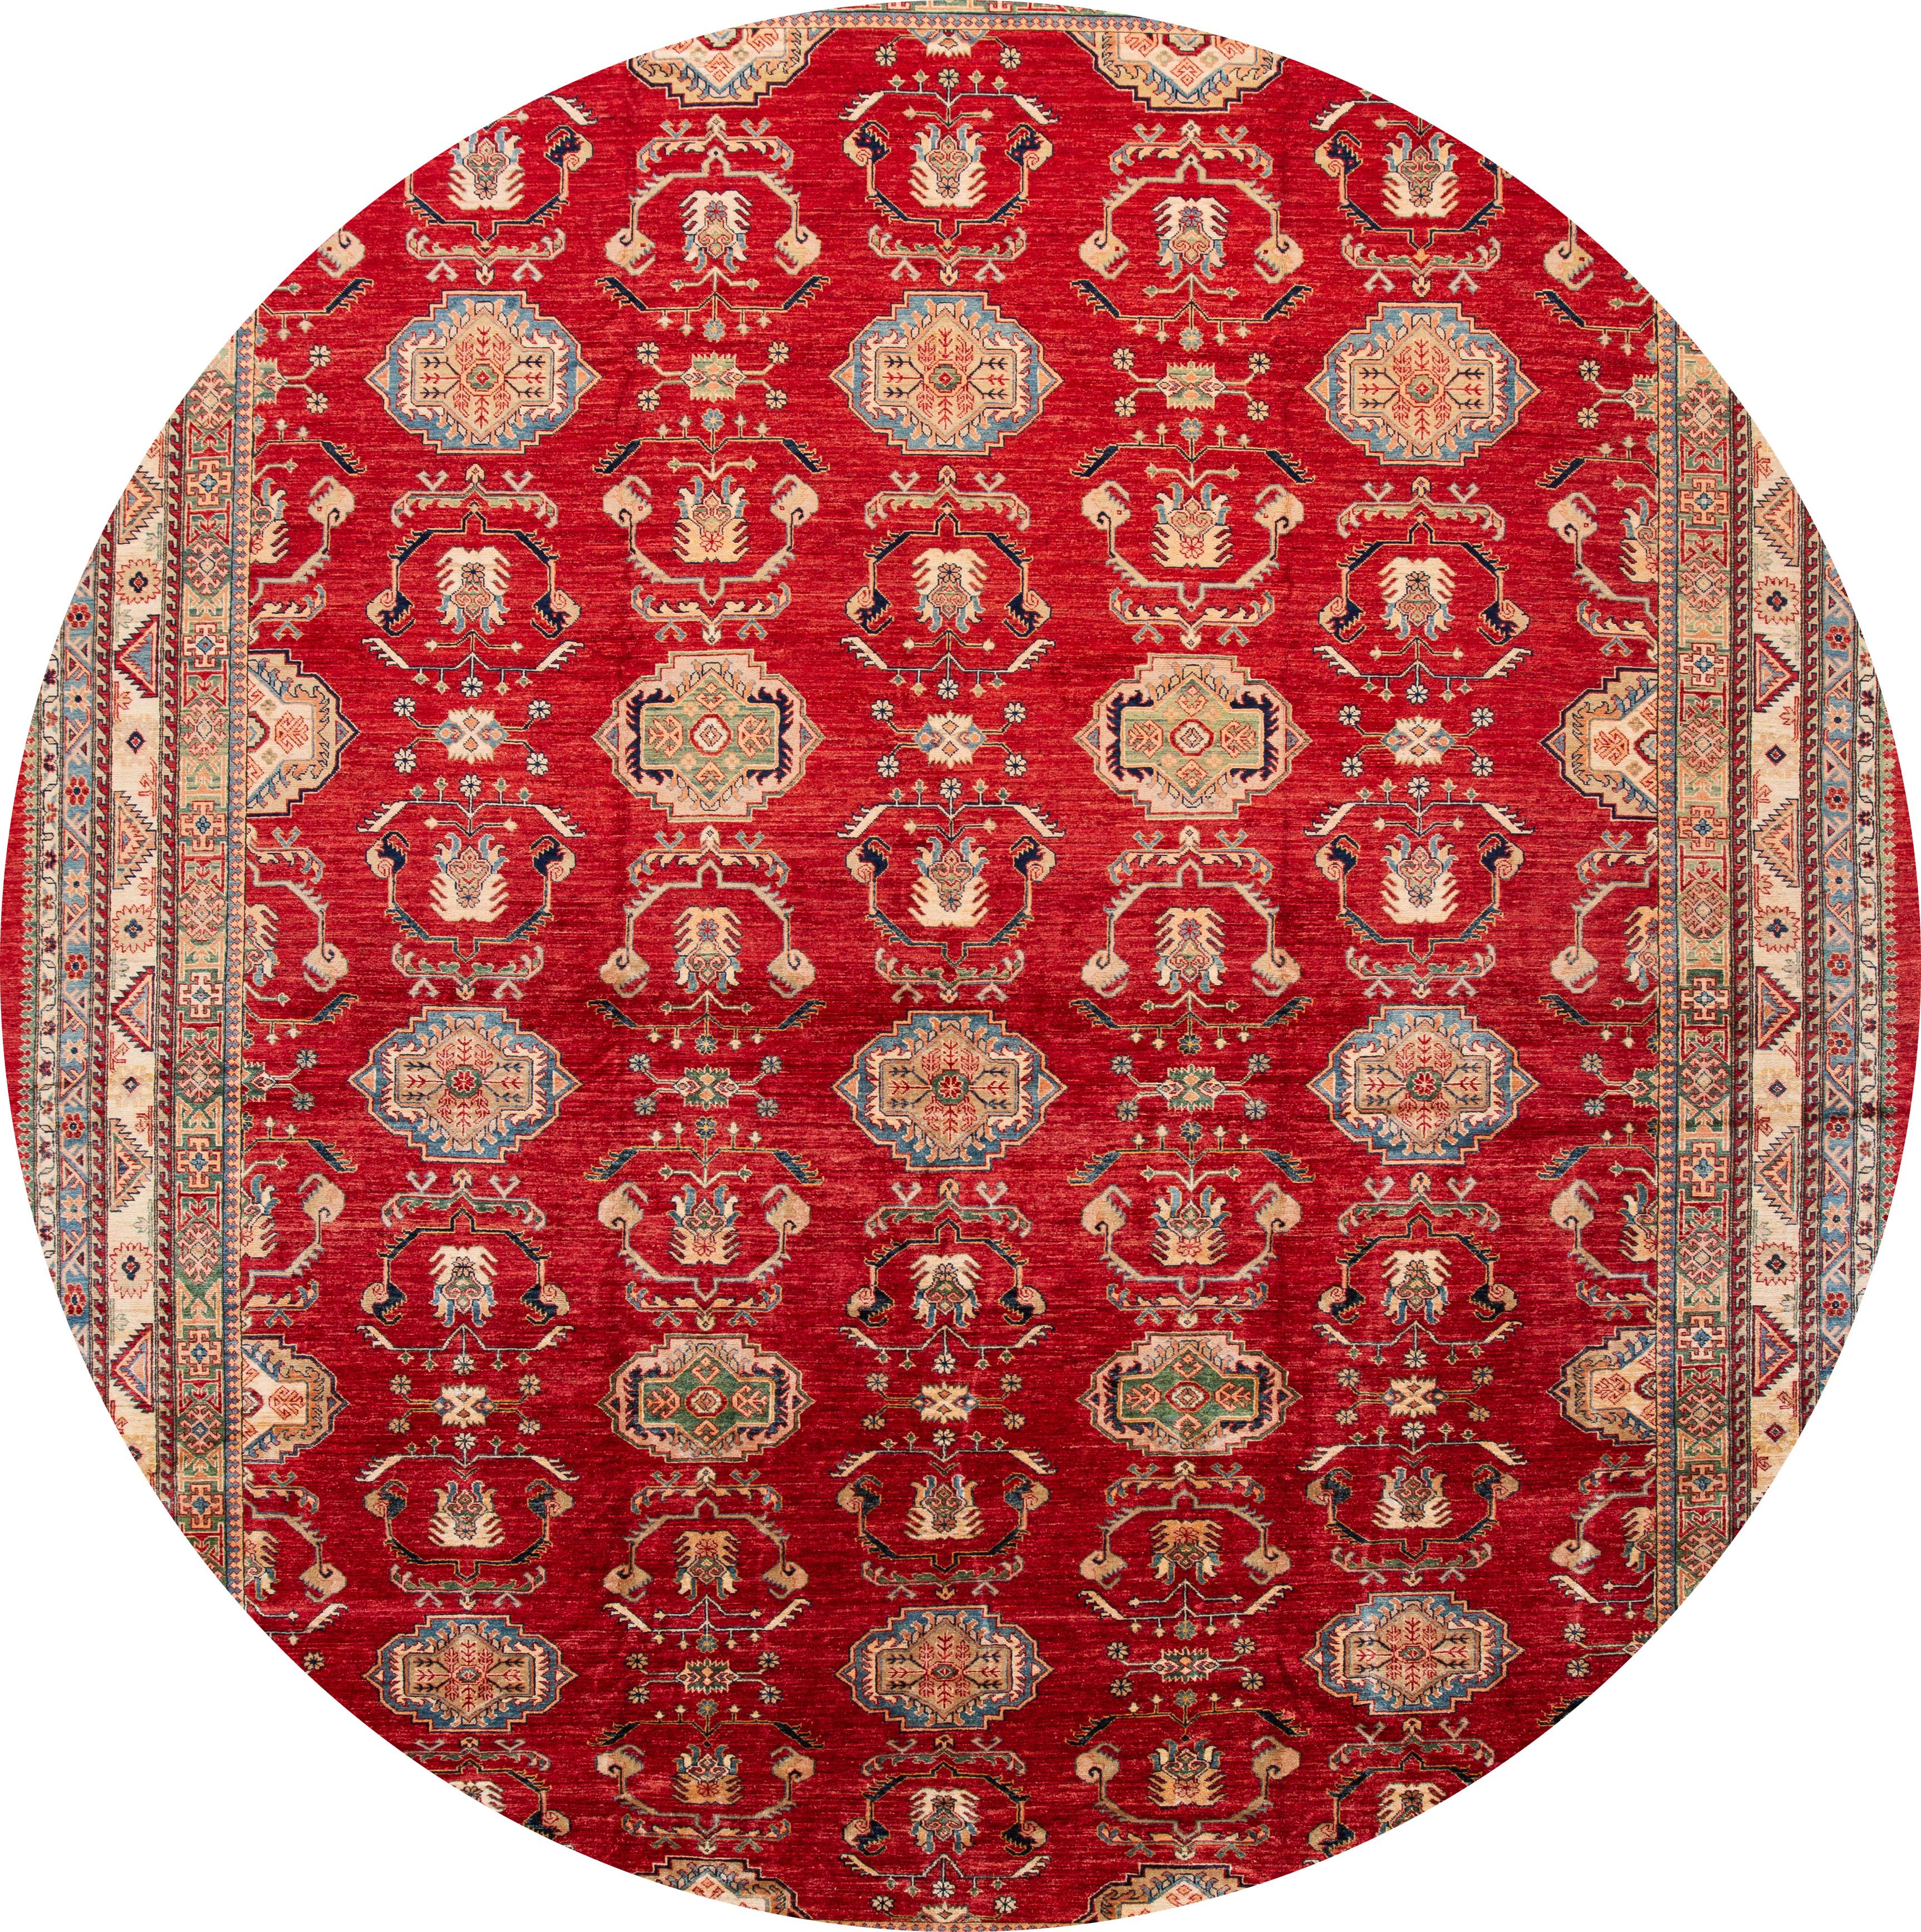 Beautifully contrasted modern Kazak wool rug with a red field, blue and ivory accents in an all-over floral design.

This rug measures: 13'1